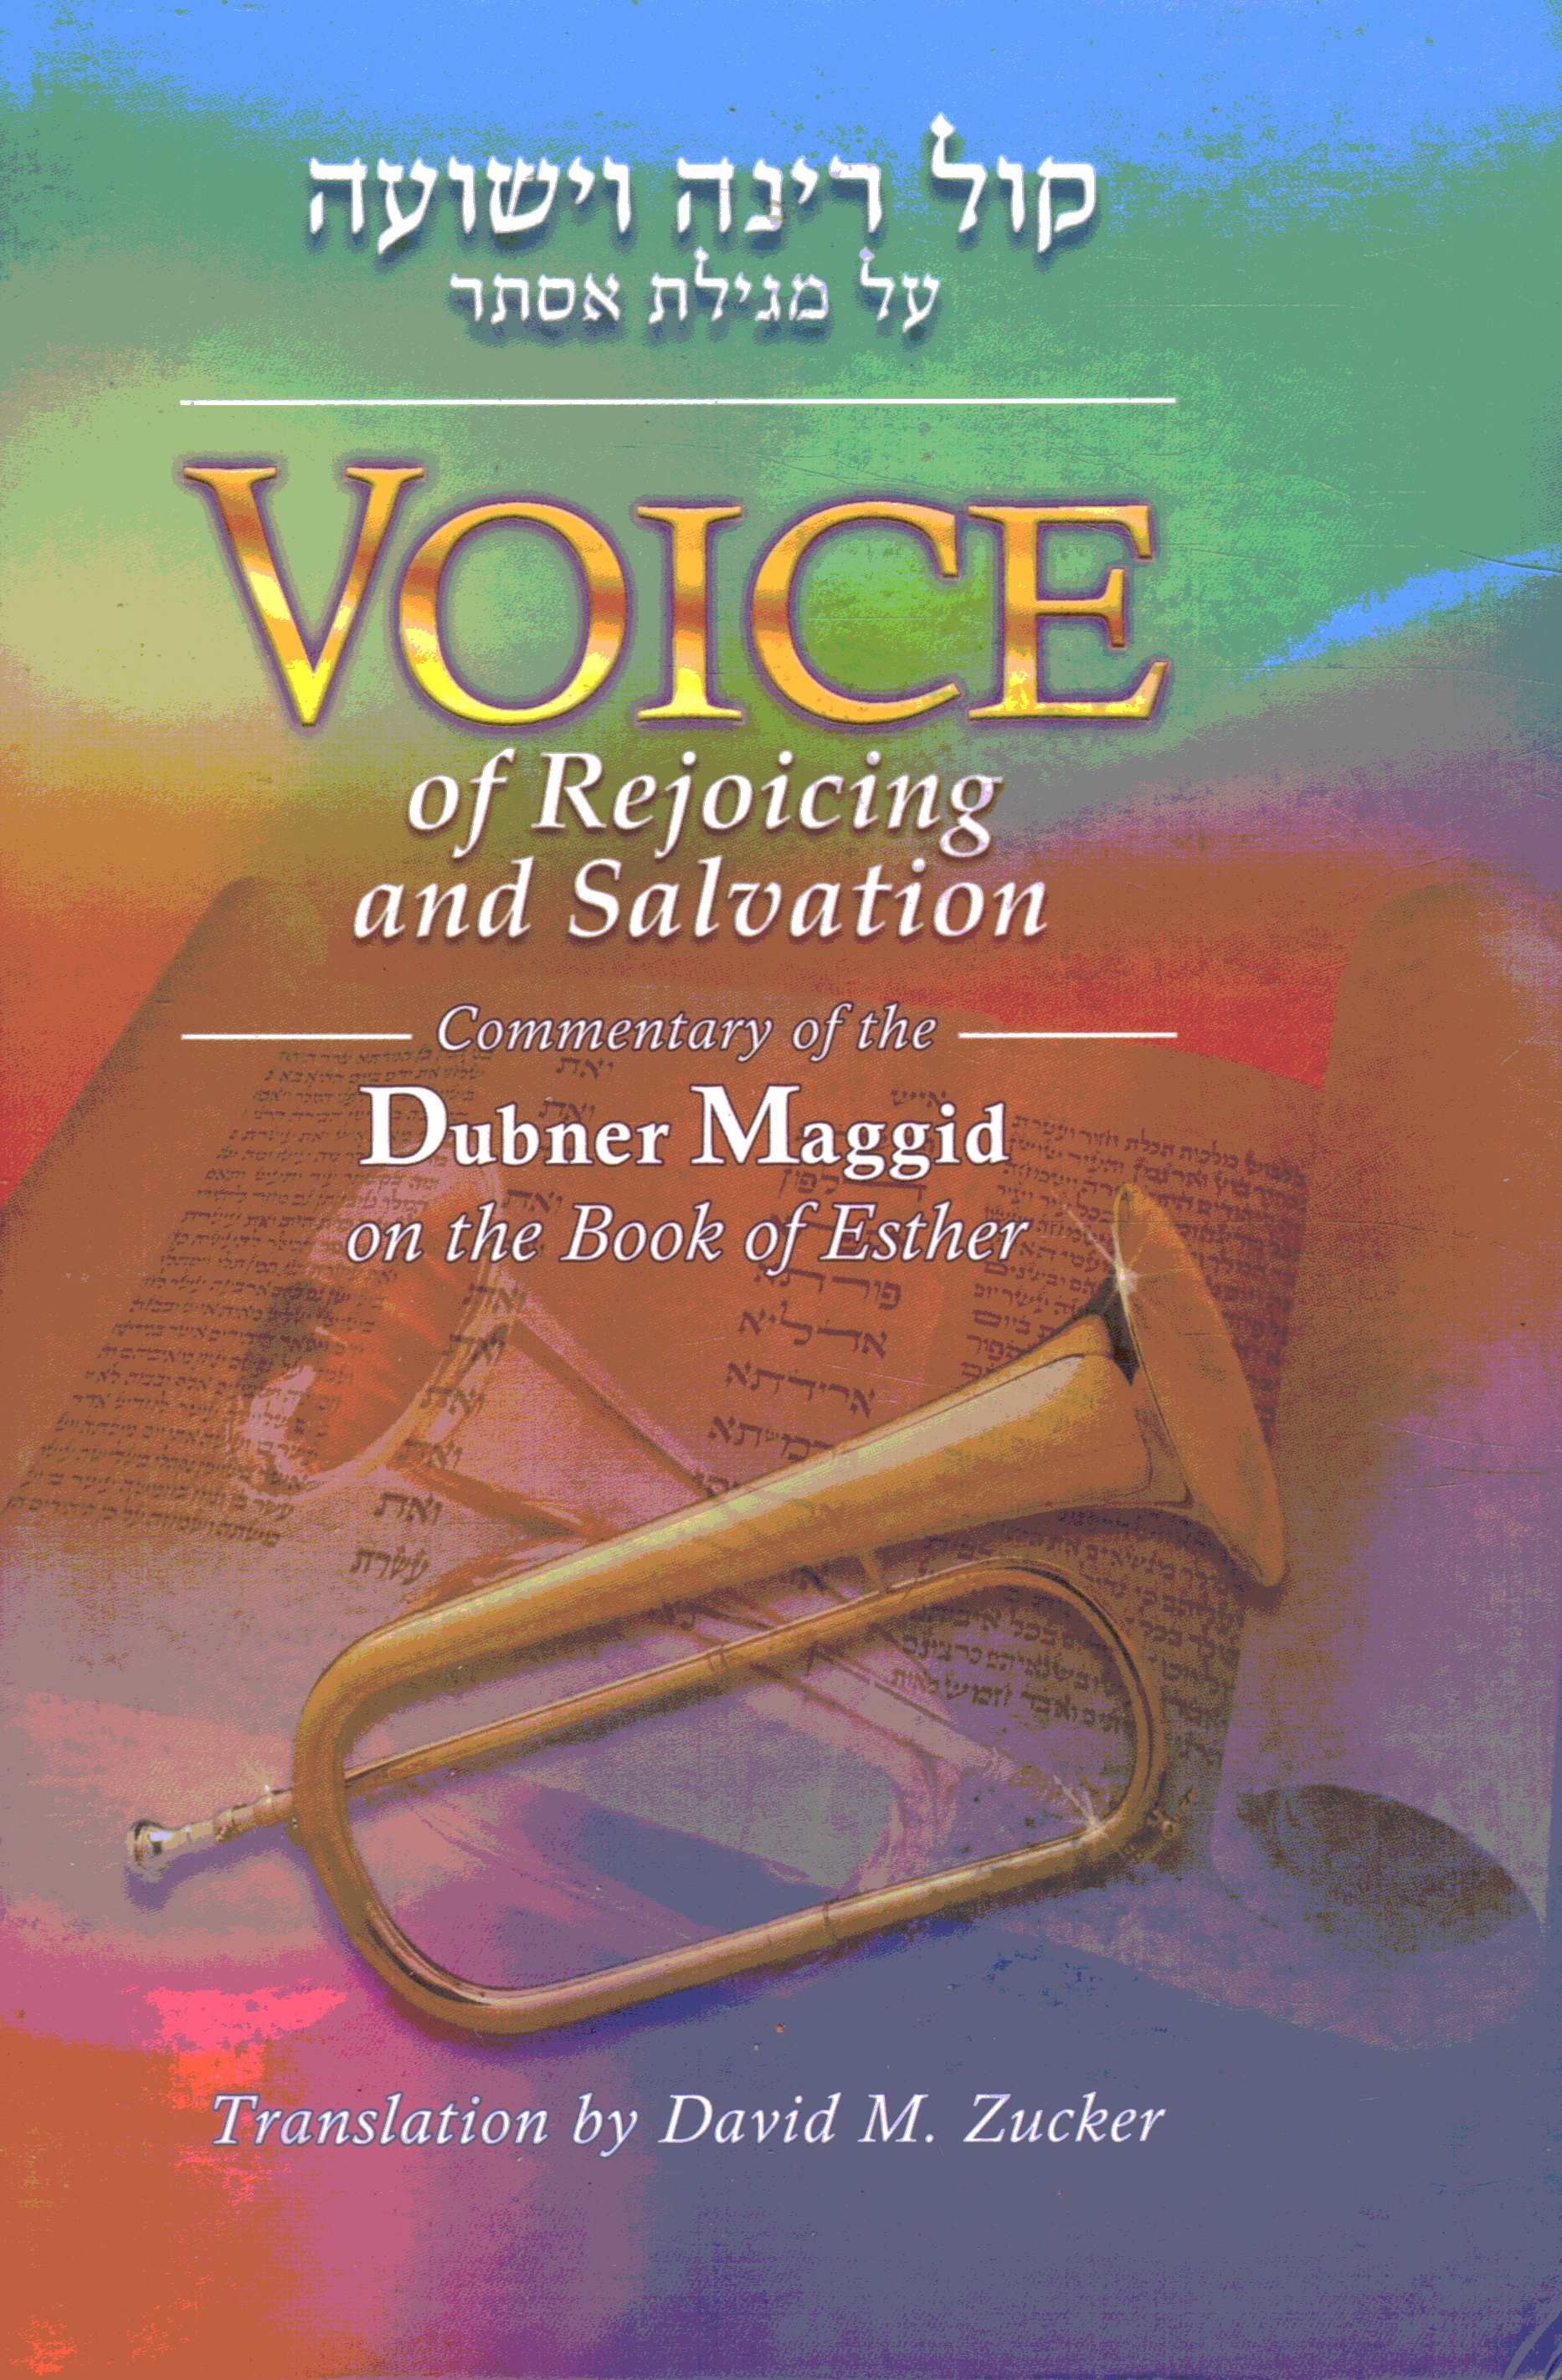 ZUCKER, DAVID (TRANSLATION BY) - Voice of Rejoicing and Salvation: Commentary of the Dubner Maggid on the Book of Esther